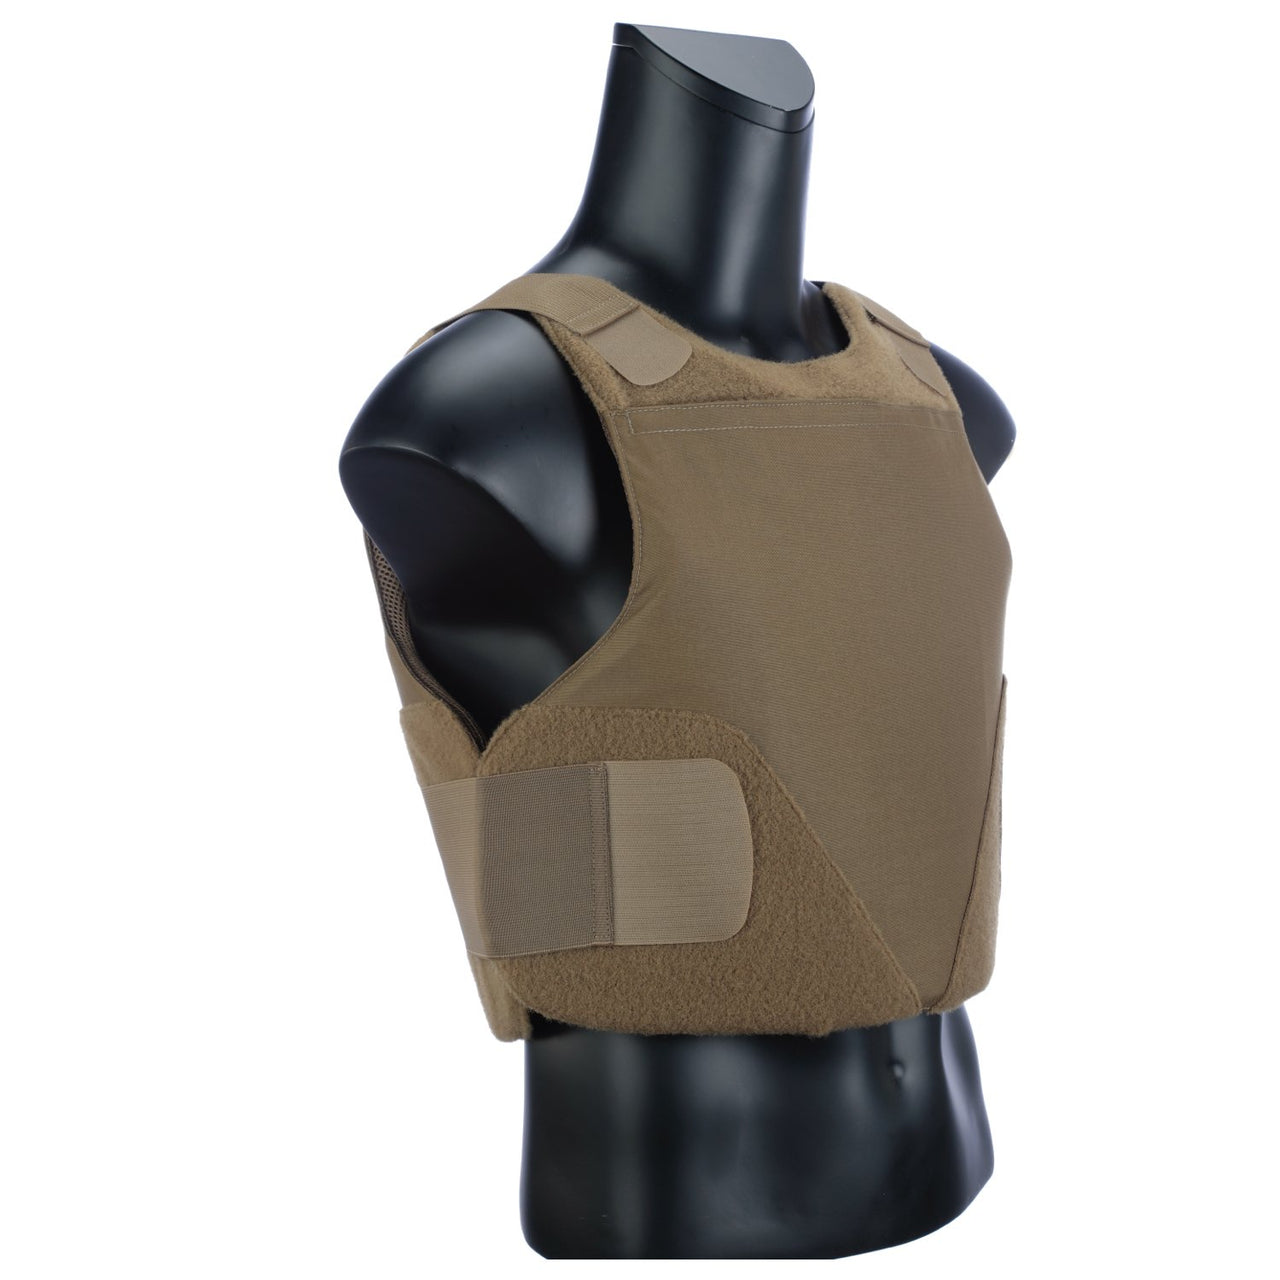 A Body Armor Direct mannequin mannequin with a coyote colored vest.